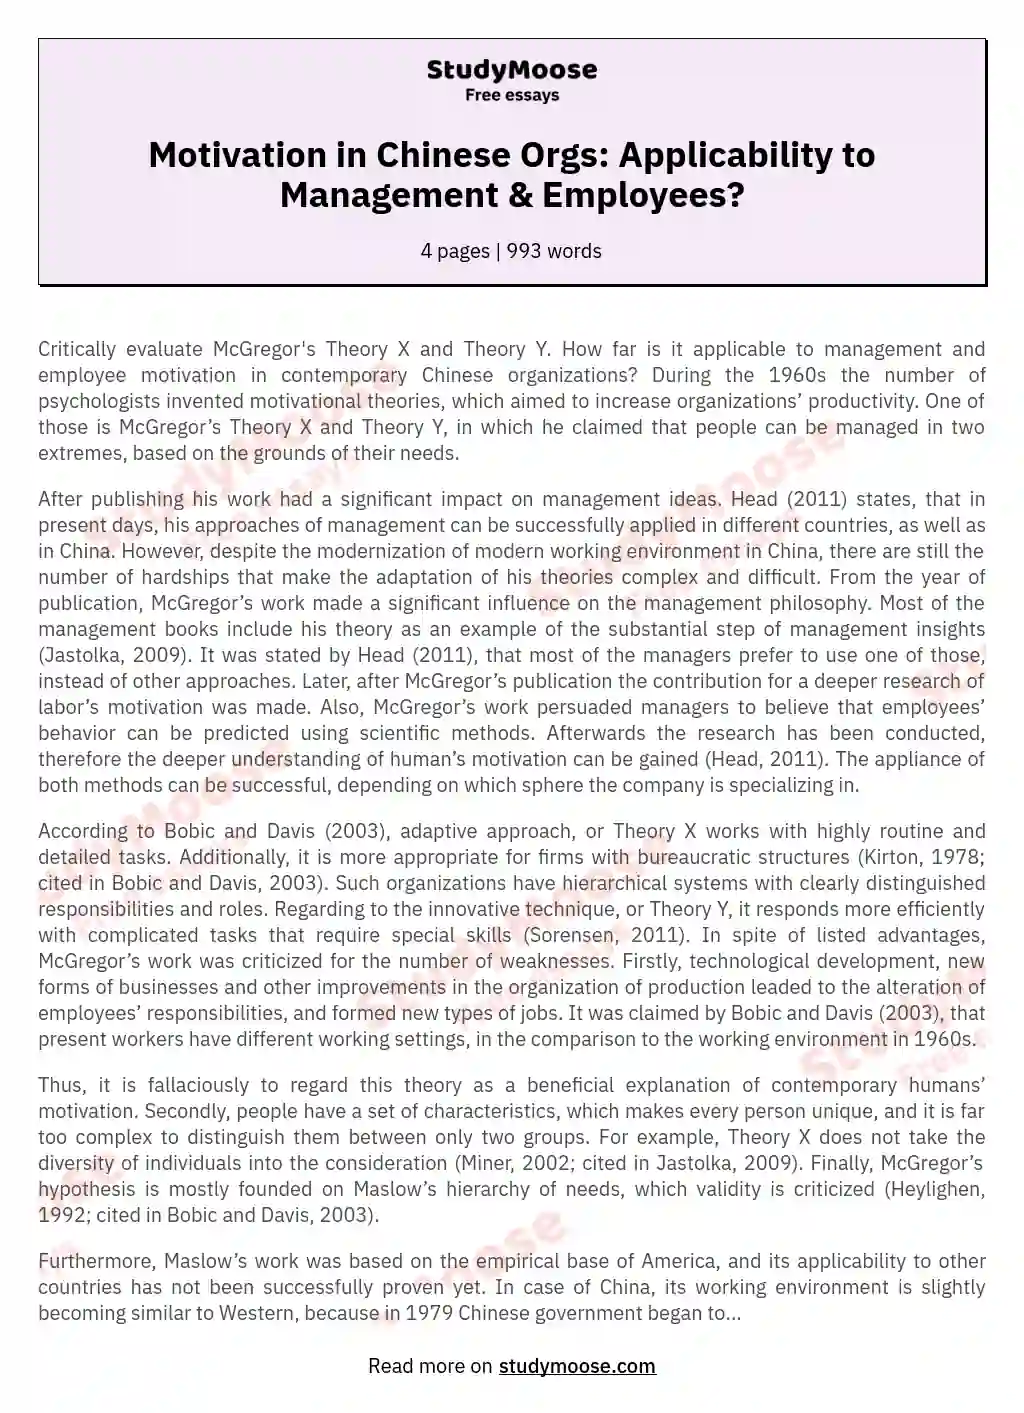 Motivation in Chinese Orgs: Applicability to Management & Employees? essay